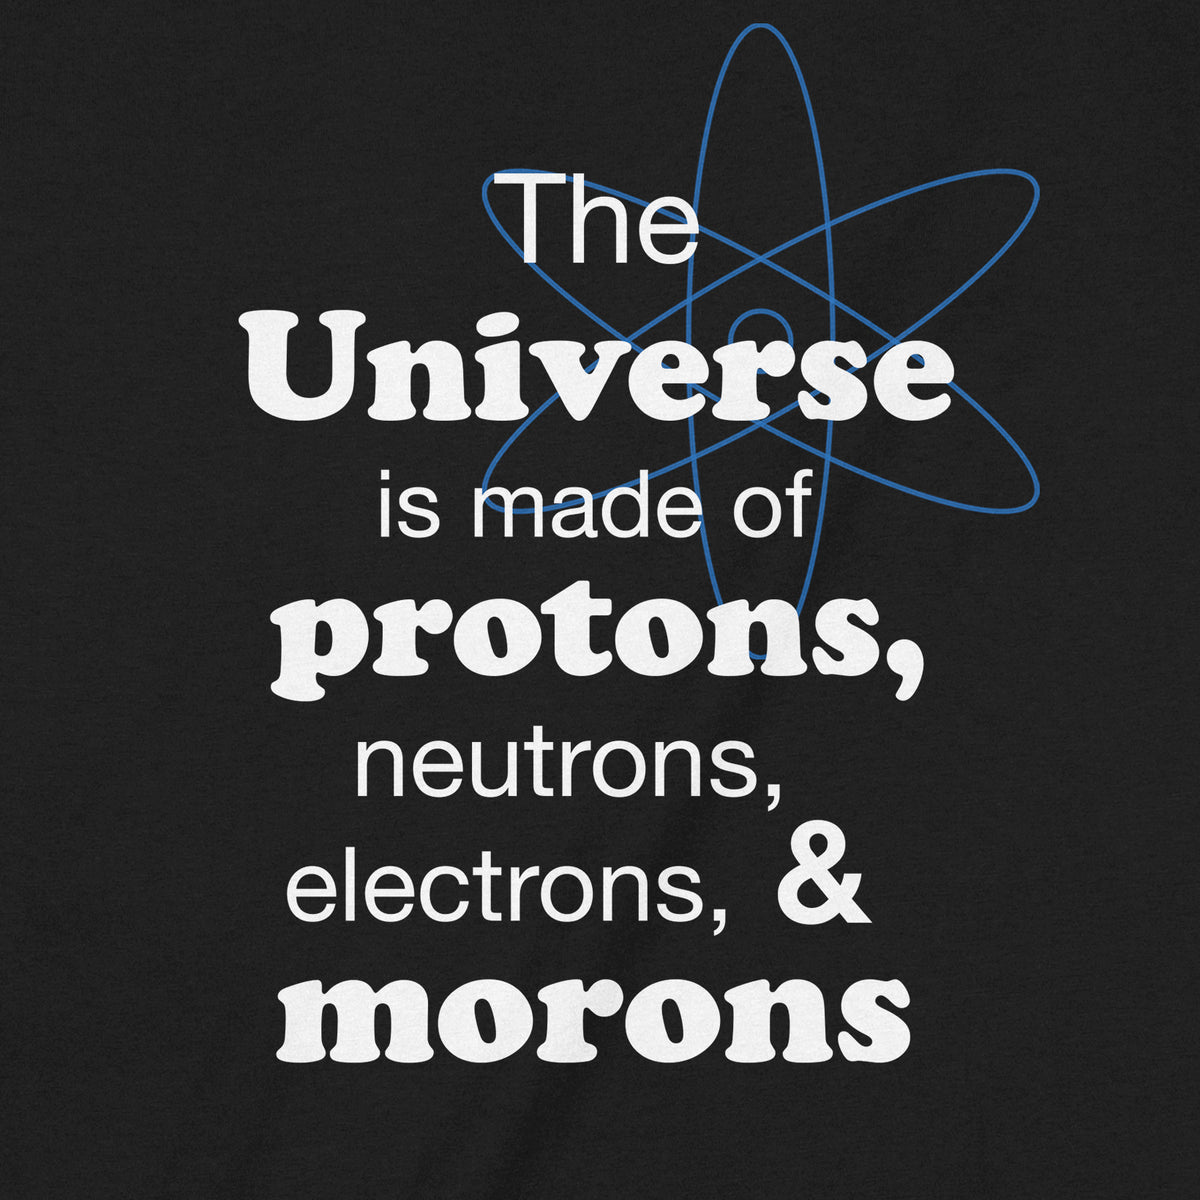 "The Universe Is Full Of" Premium Midweight Ringspun Cotton T-Shirt - Mens/Womens Fits